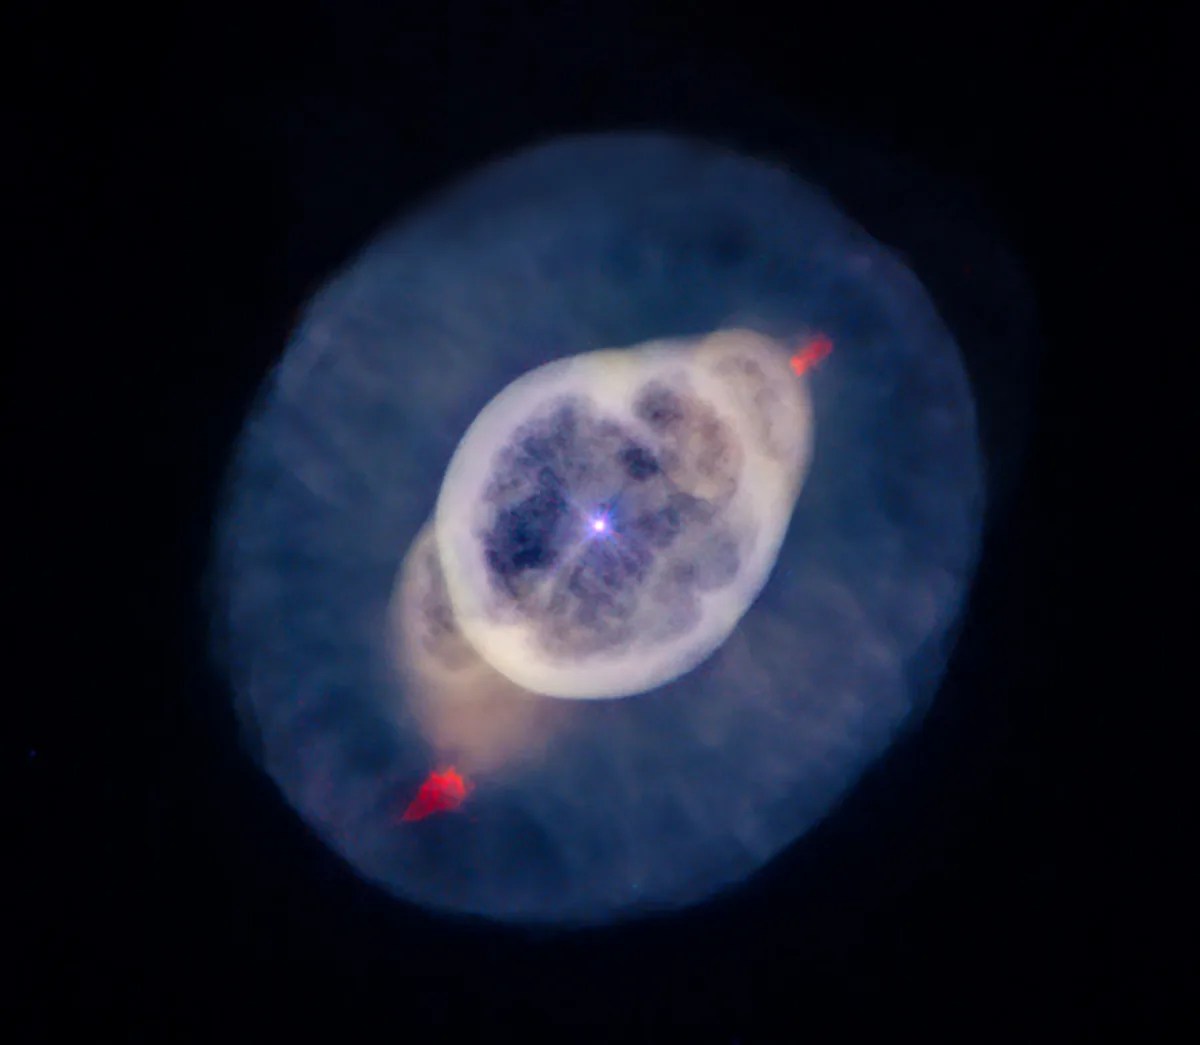 A blue star shining at the center of the nebula is surrounded by a thick white bubble, which turns pale orange at the outer edges. It has a small red "flare" outside this bubble at either pole, and a thick spherical layer of blue around the whole structure.